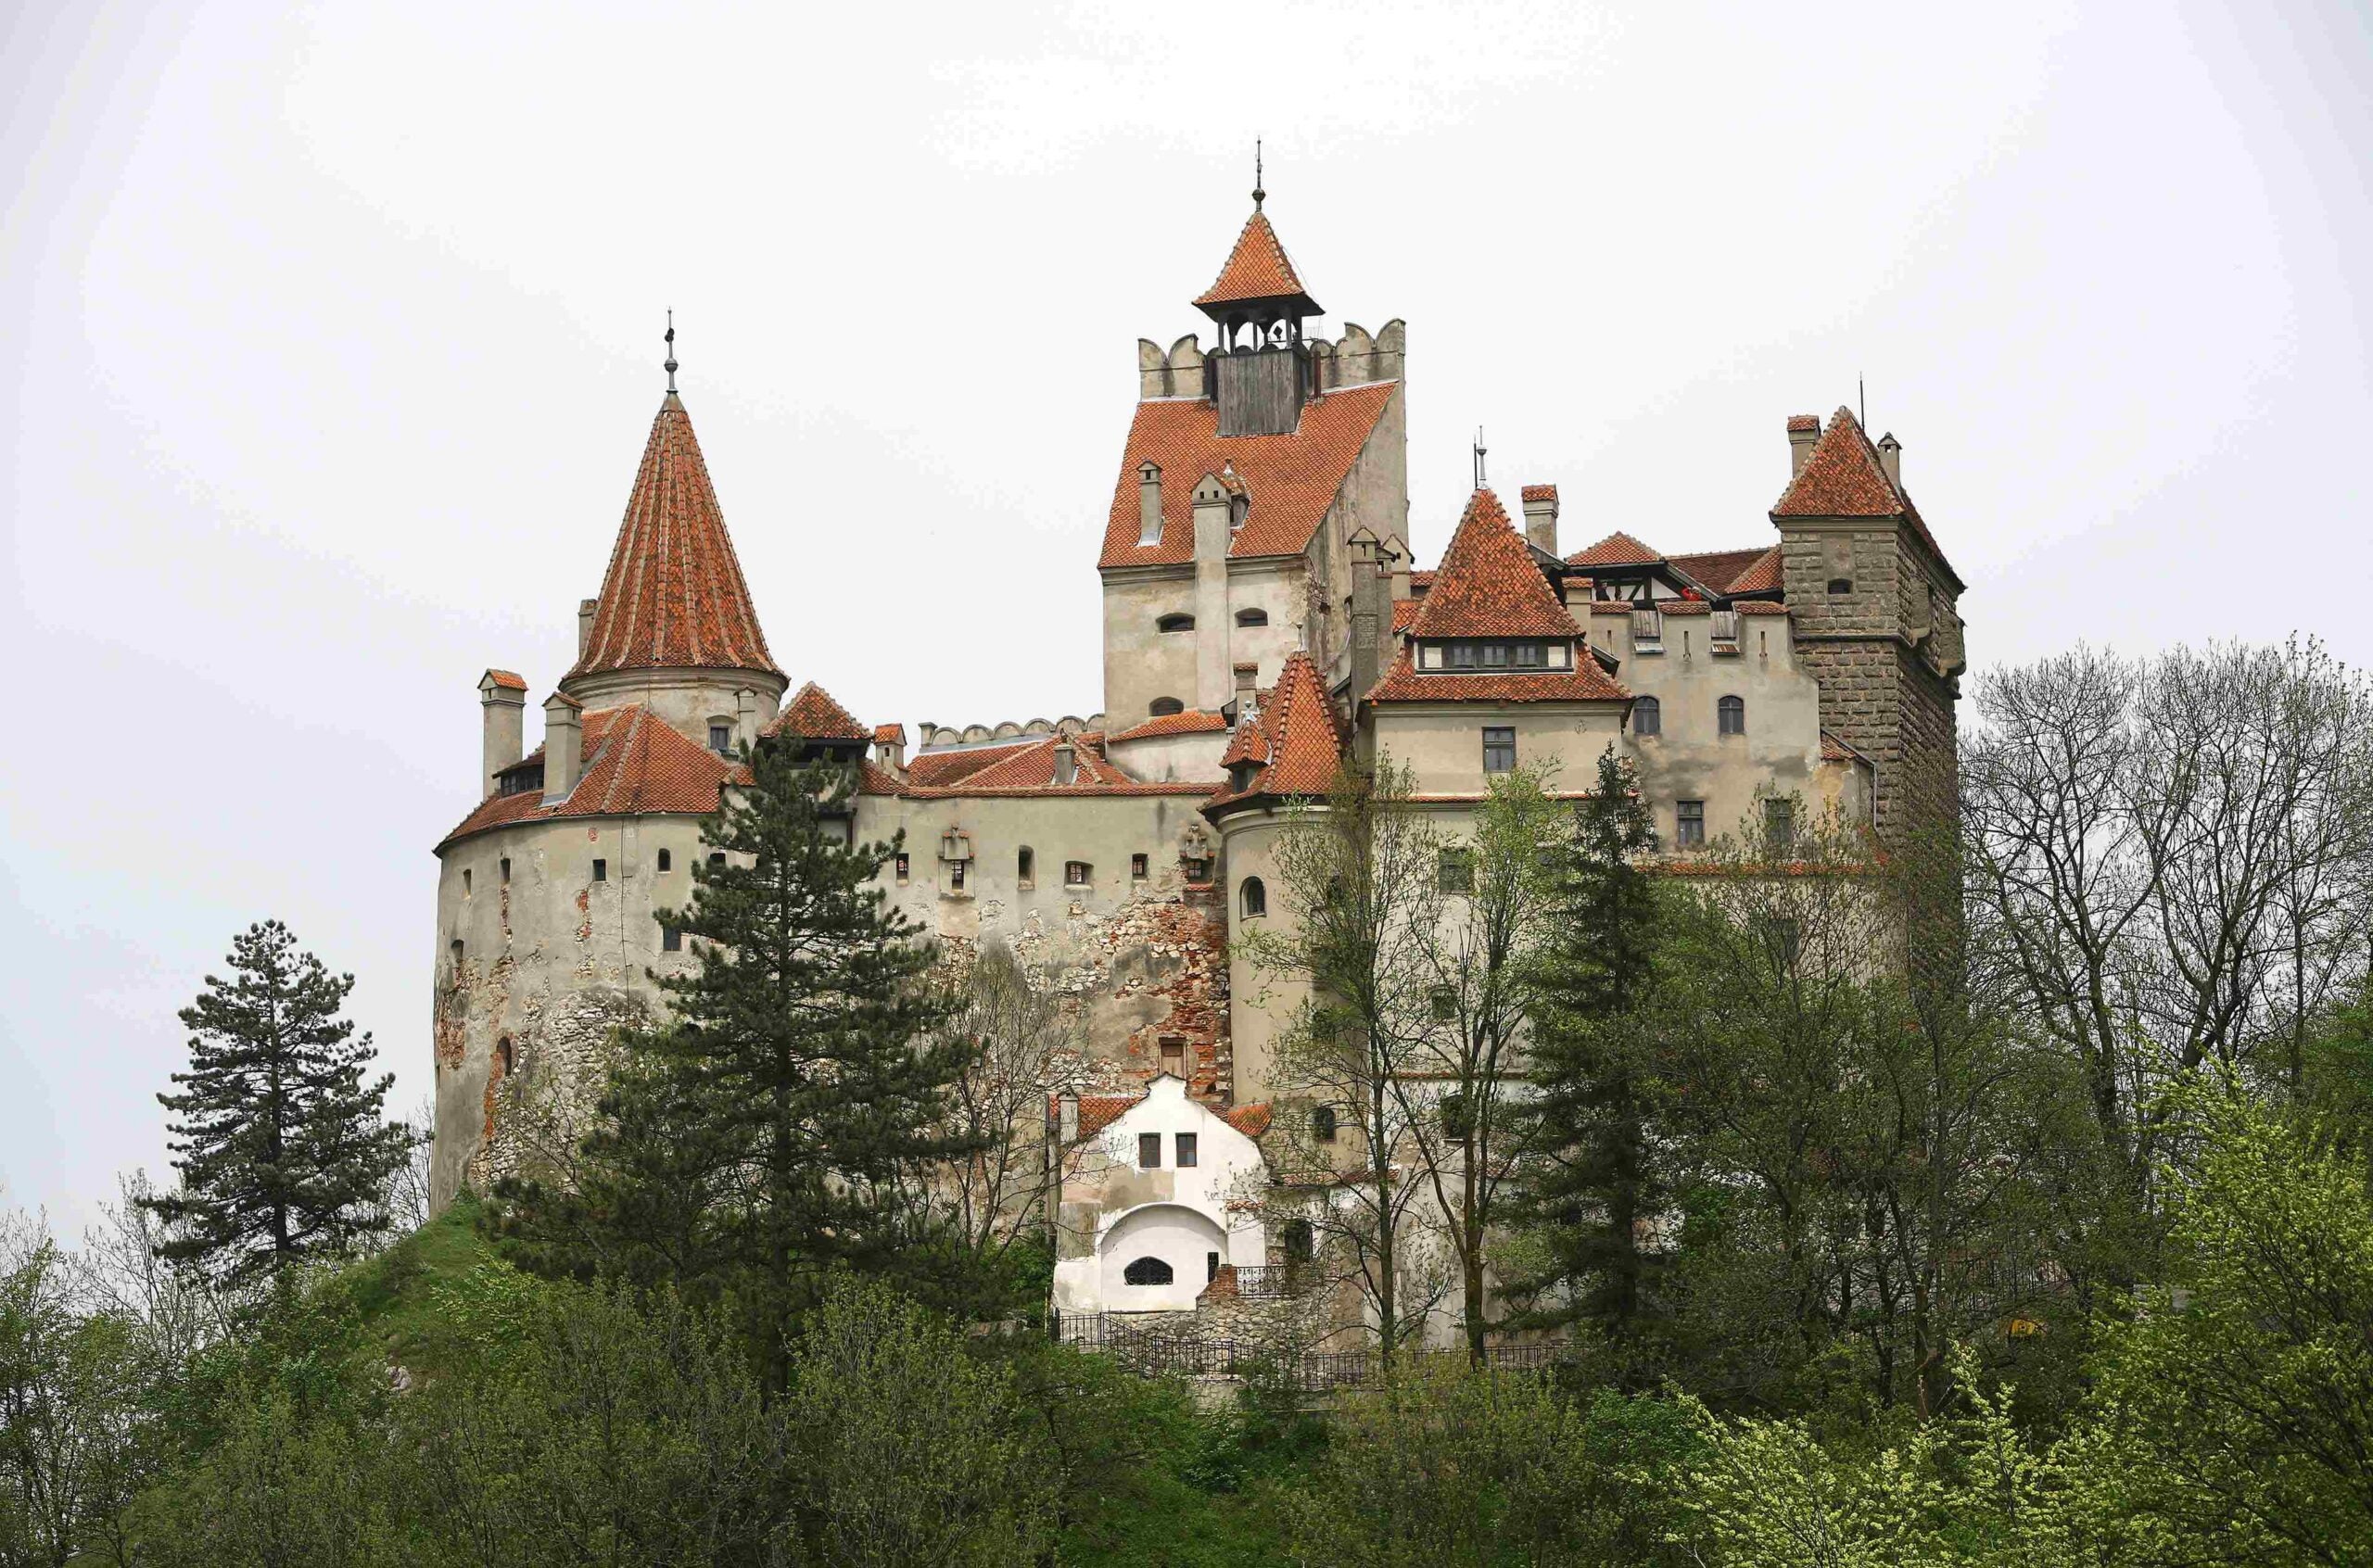 Welcome to Bran Castle! - History, Schedule & Tickets Online